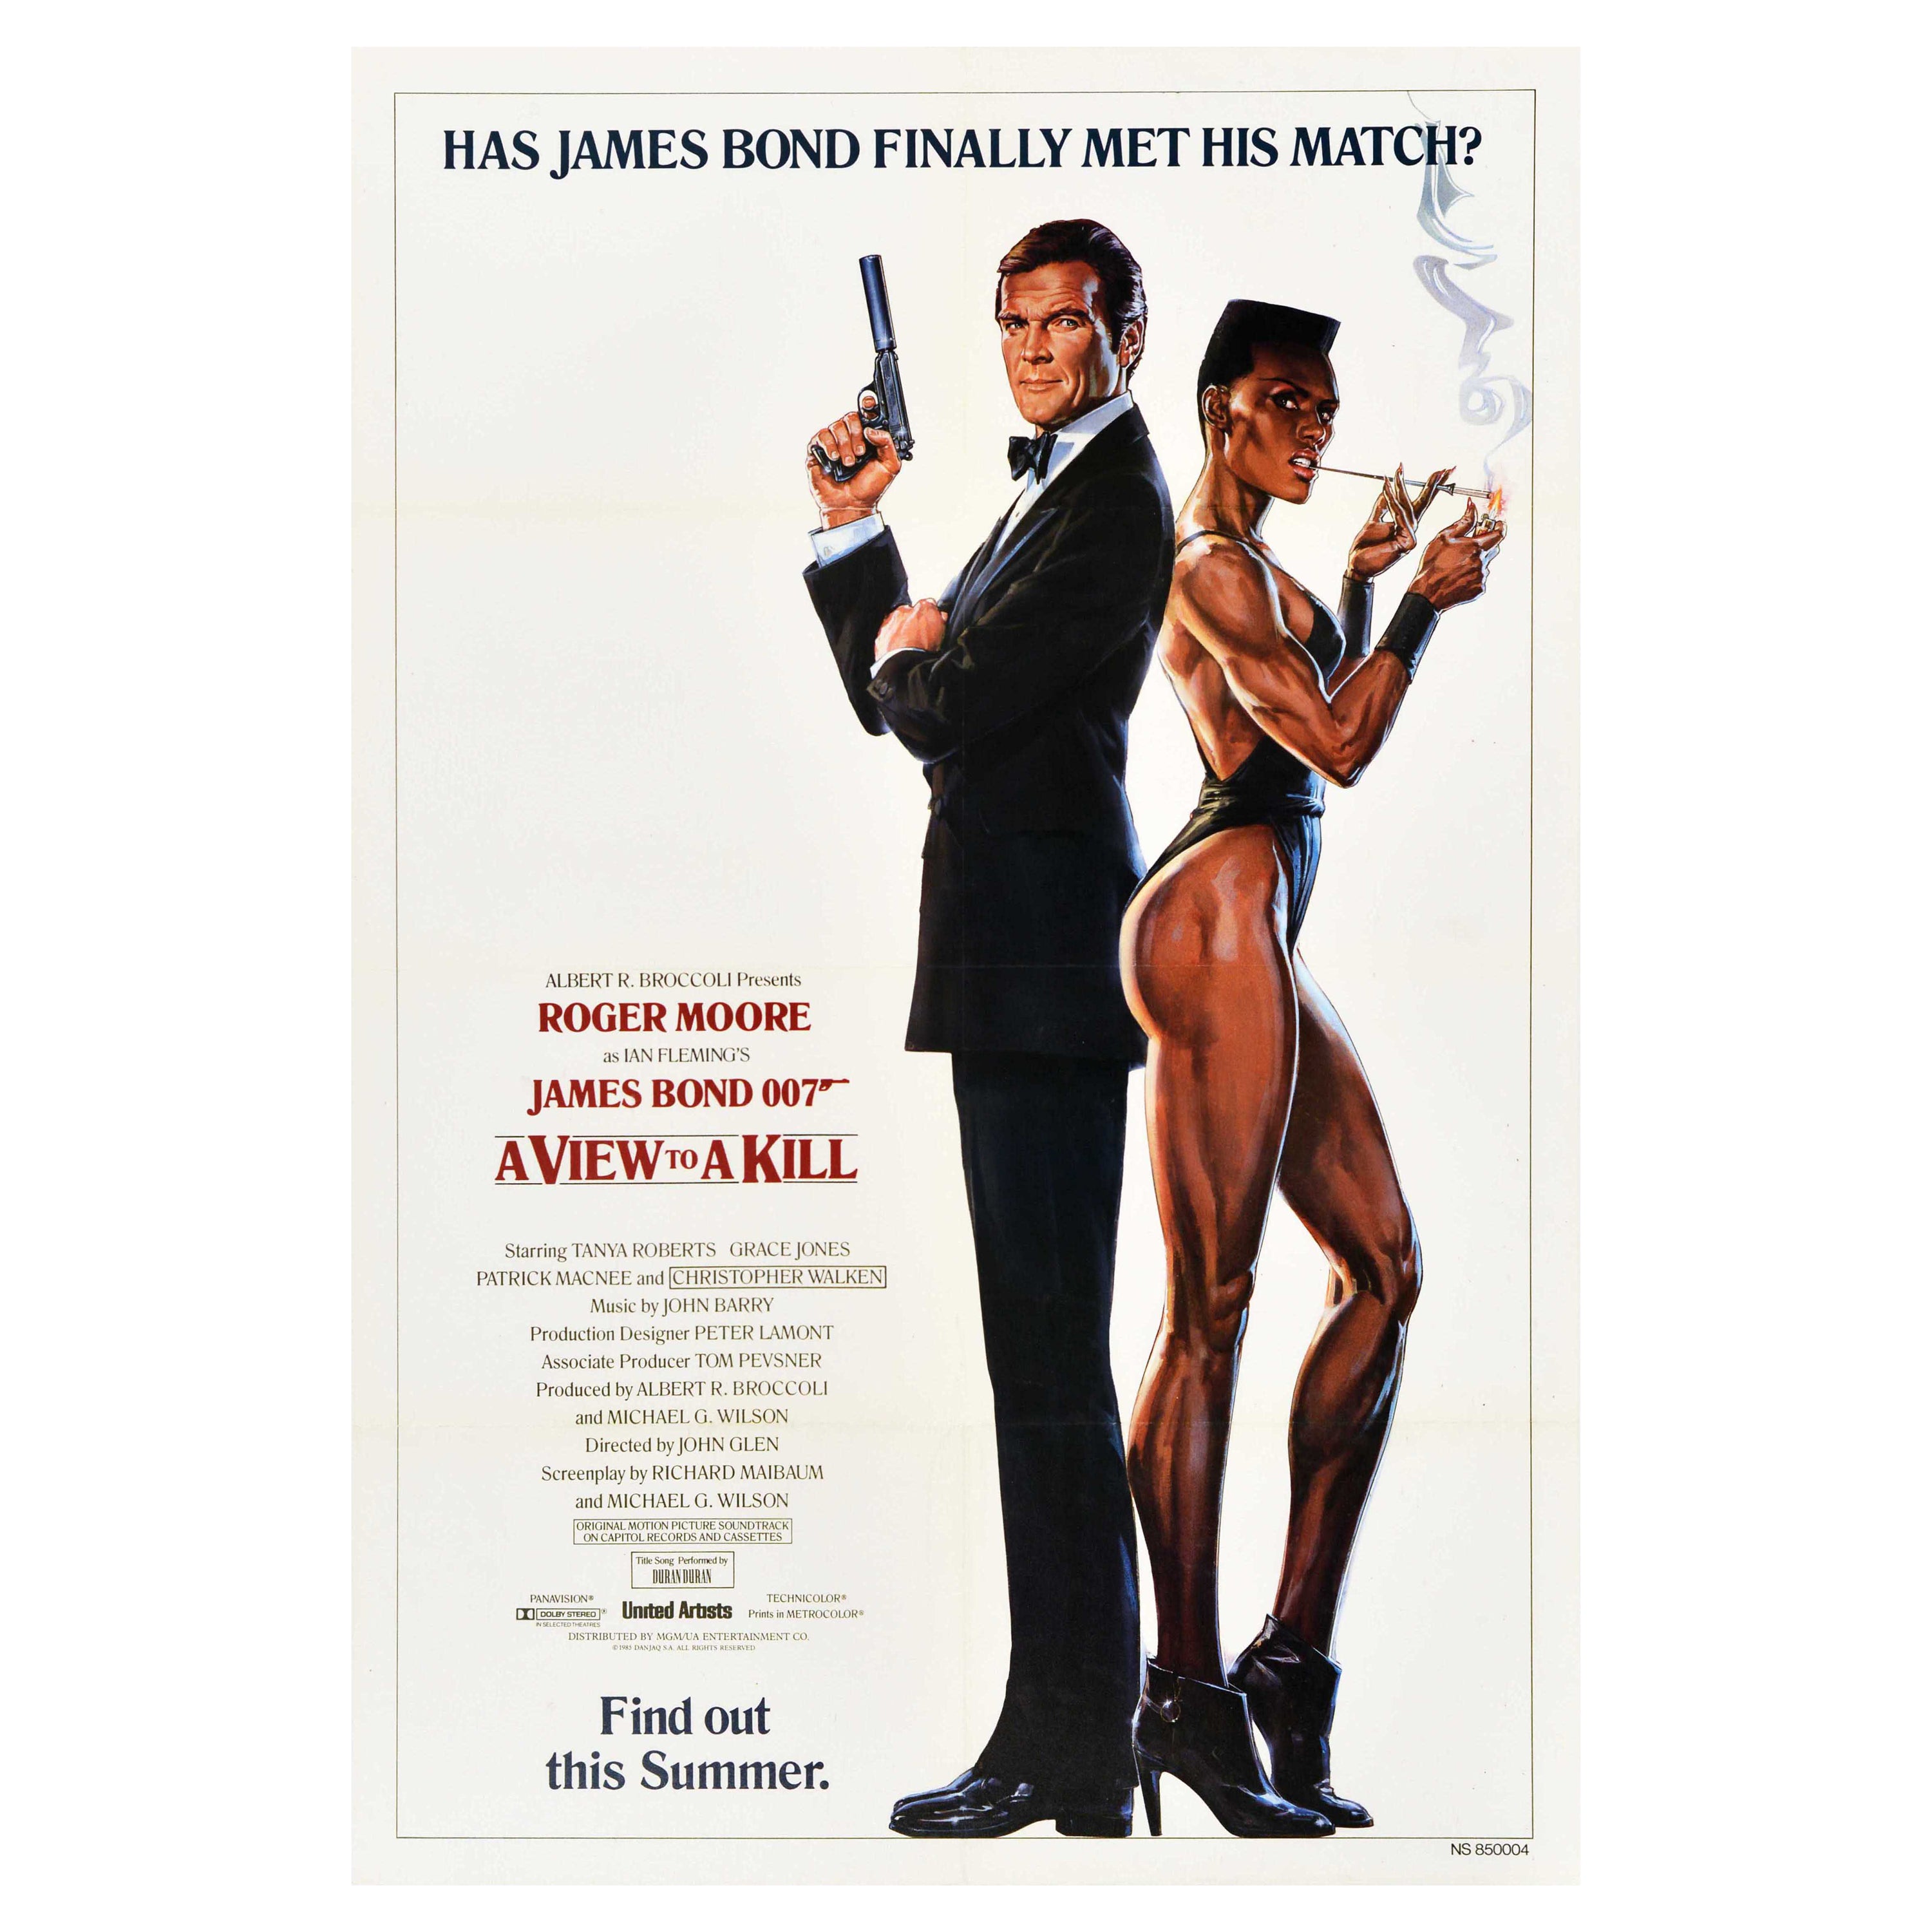 Original Vintage Movie Poster James Bond A View To A Kill 007 Roger Moore Goozee For Sale